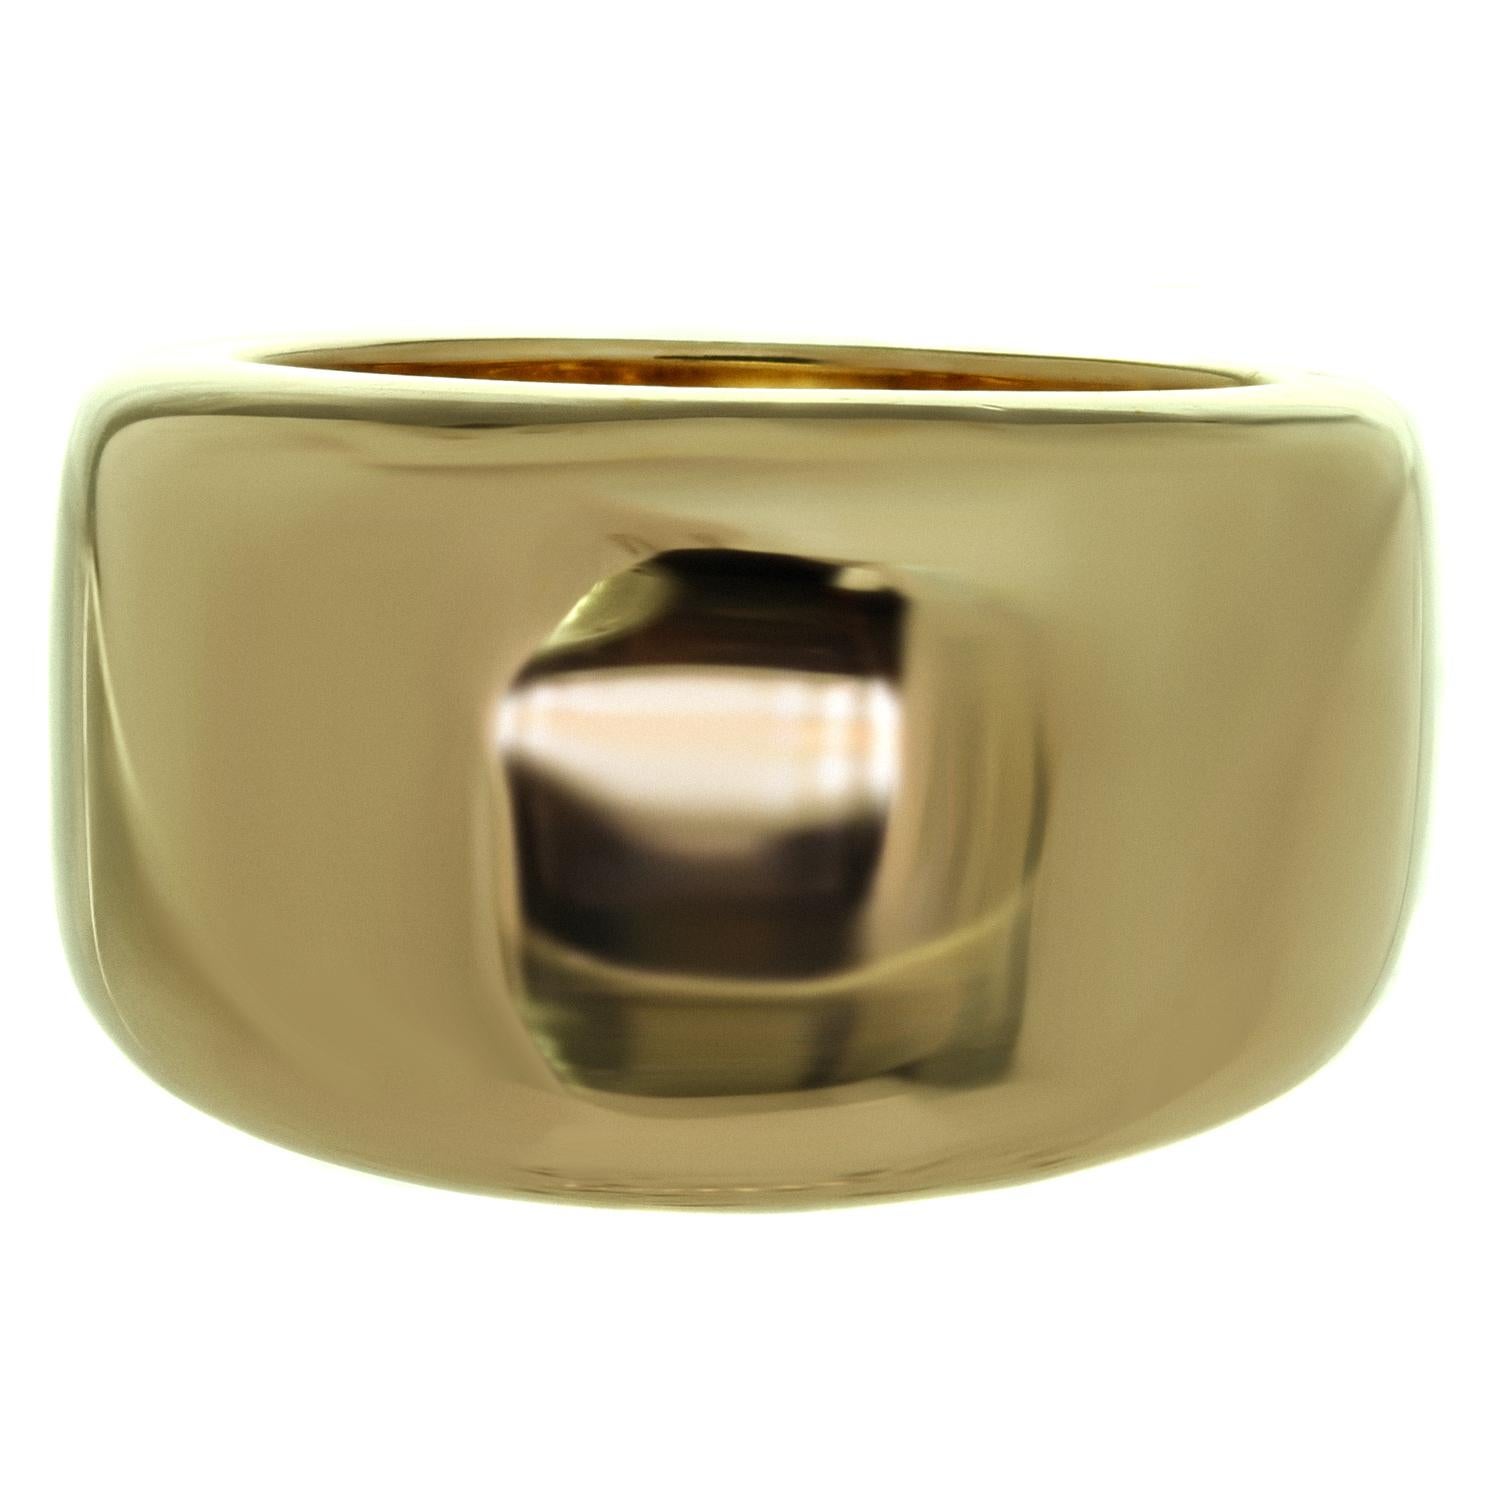 This classic Cartier ring from the Nouvelle Vague features a smooth wide band design crafted in 18k yellow gold. Made in France circa 1997. Measurements: 0.51